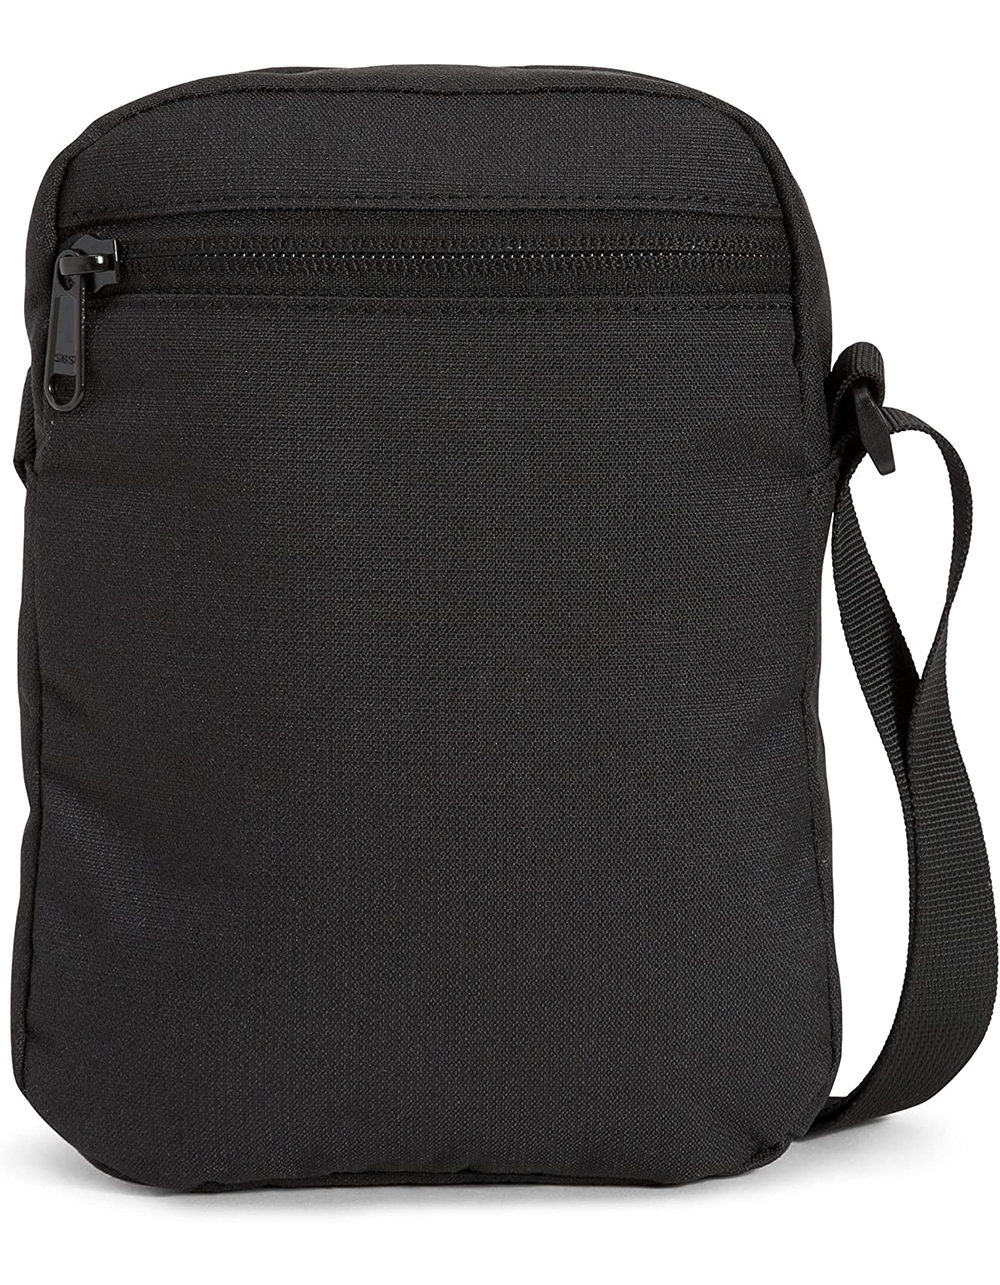 THE NORTH FACE Jester Crossbody Bag - BLACK/CORAL | Tillys